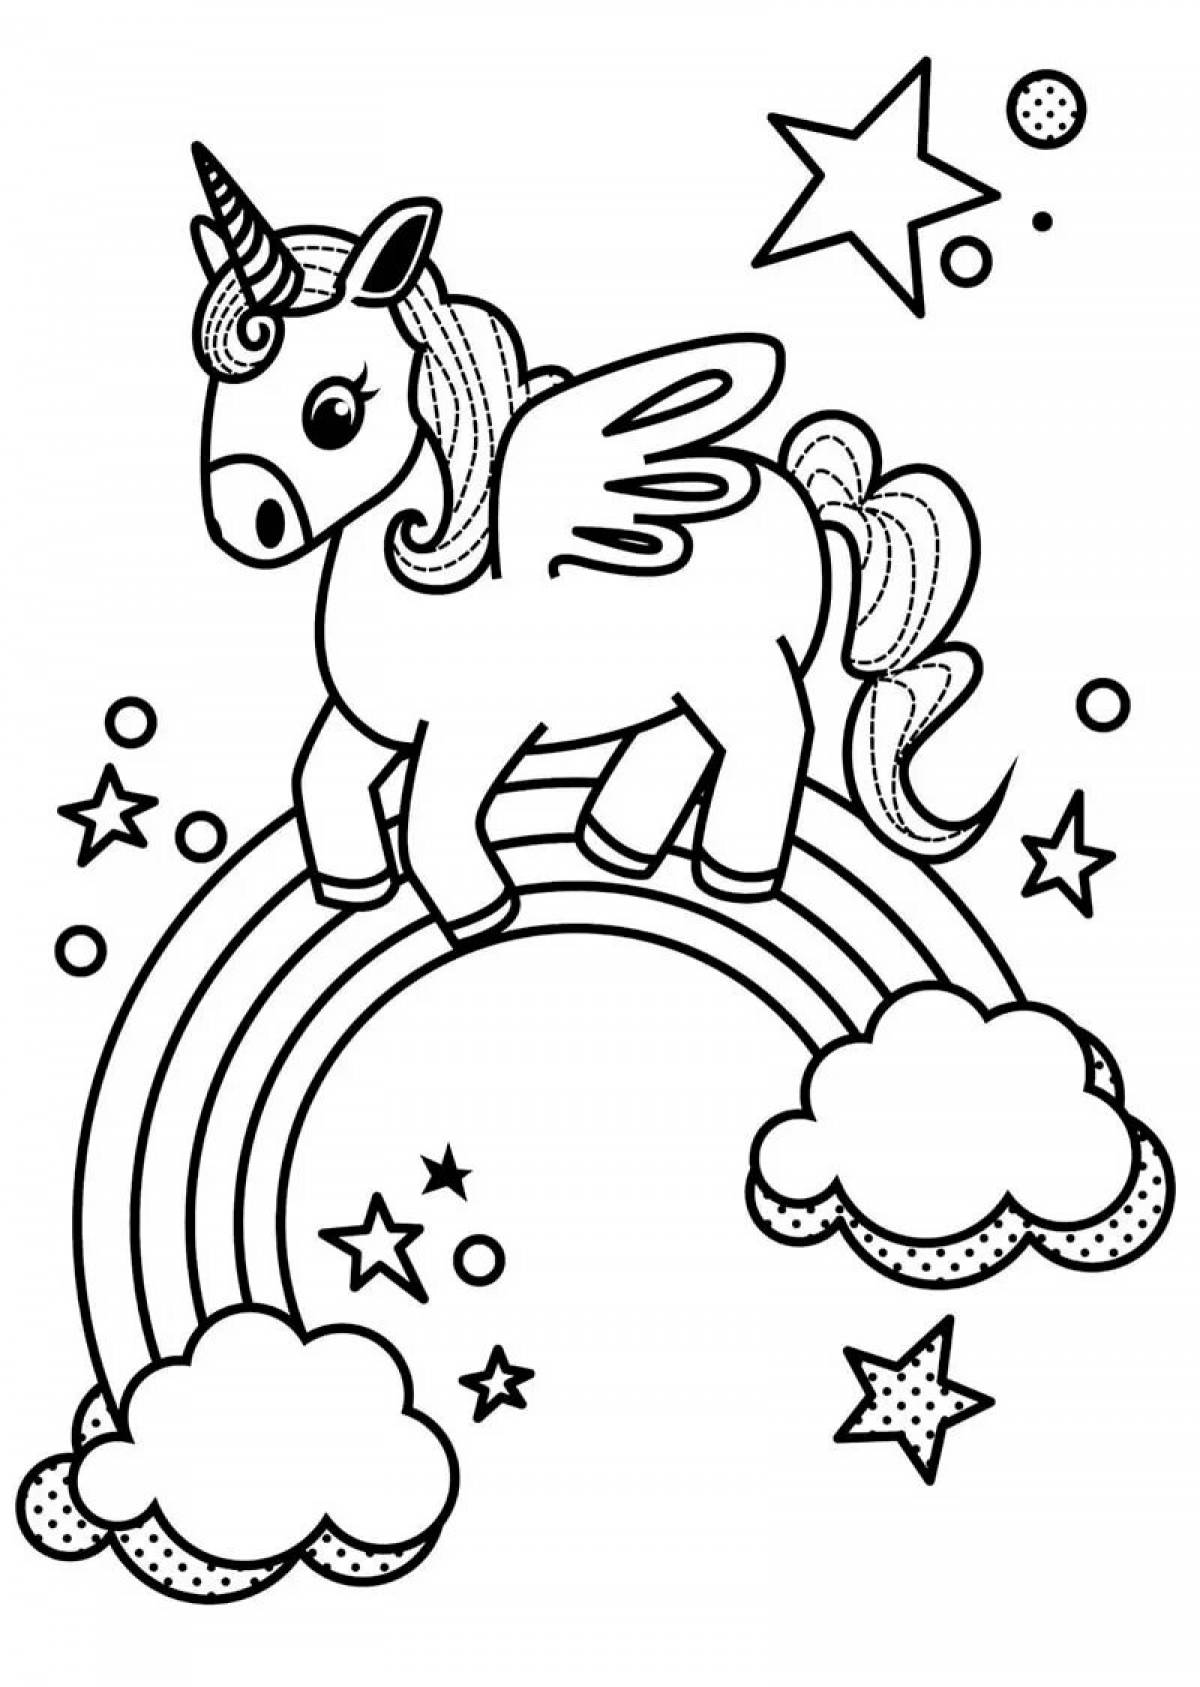 Unicorn drawing for kids #11